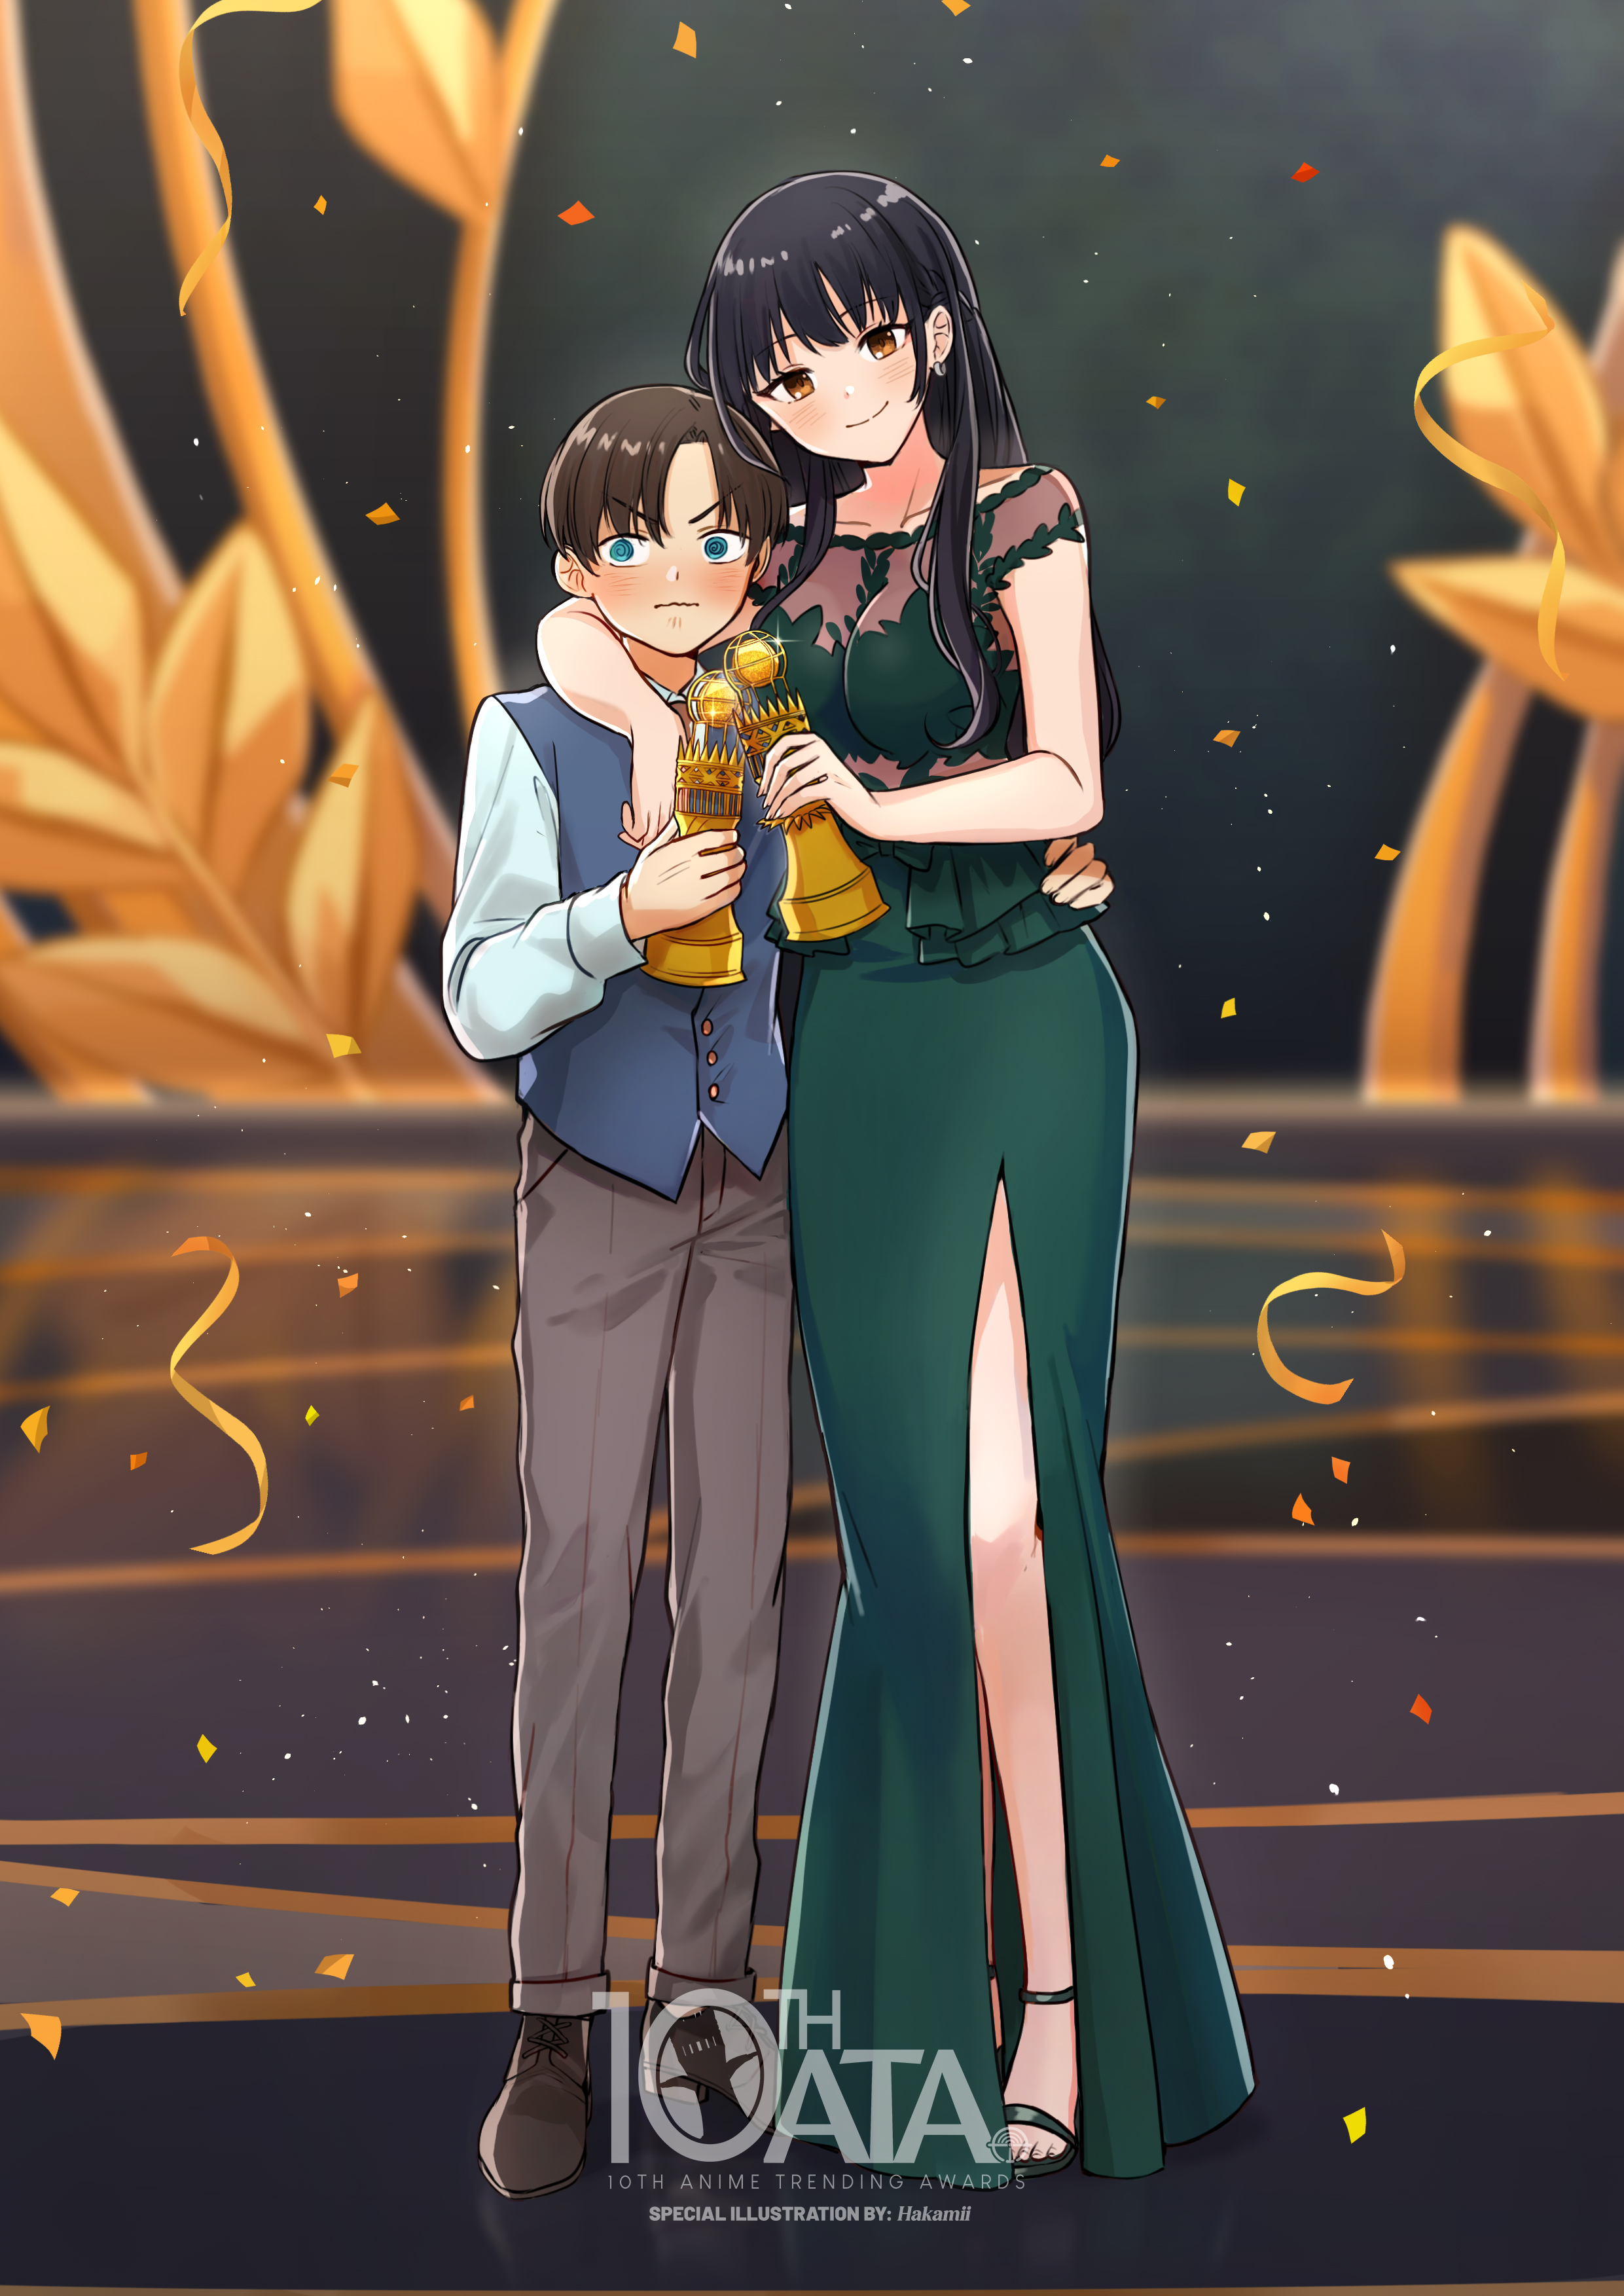 The Dangers in My Heart's Kyotaro and Anna proclaimed Couple or Ship of the Year in the 10th Anime Trending Awards